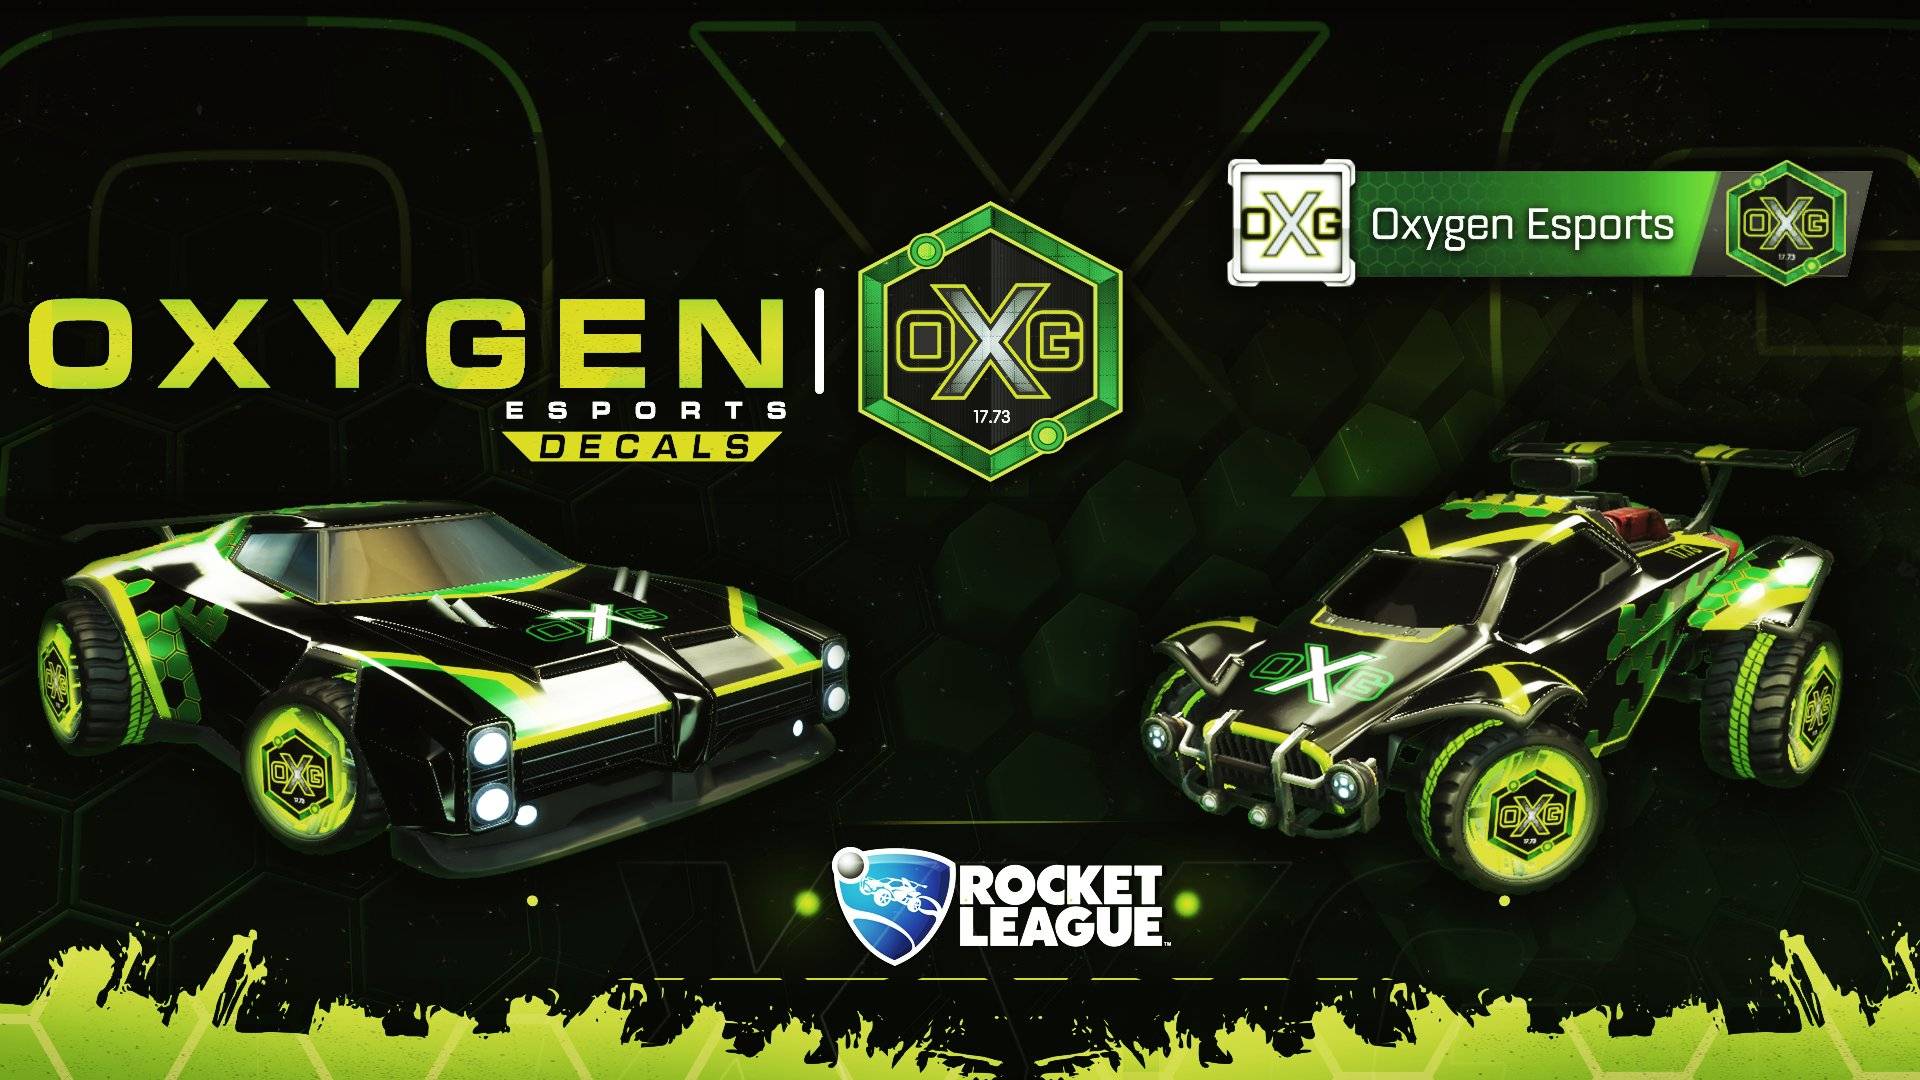 Big Comeback To Europe By Oxygen Esports